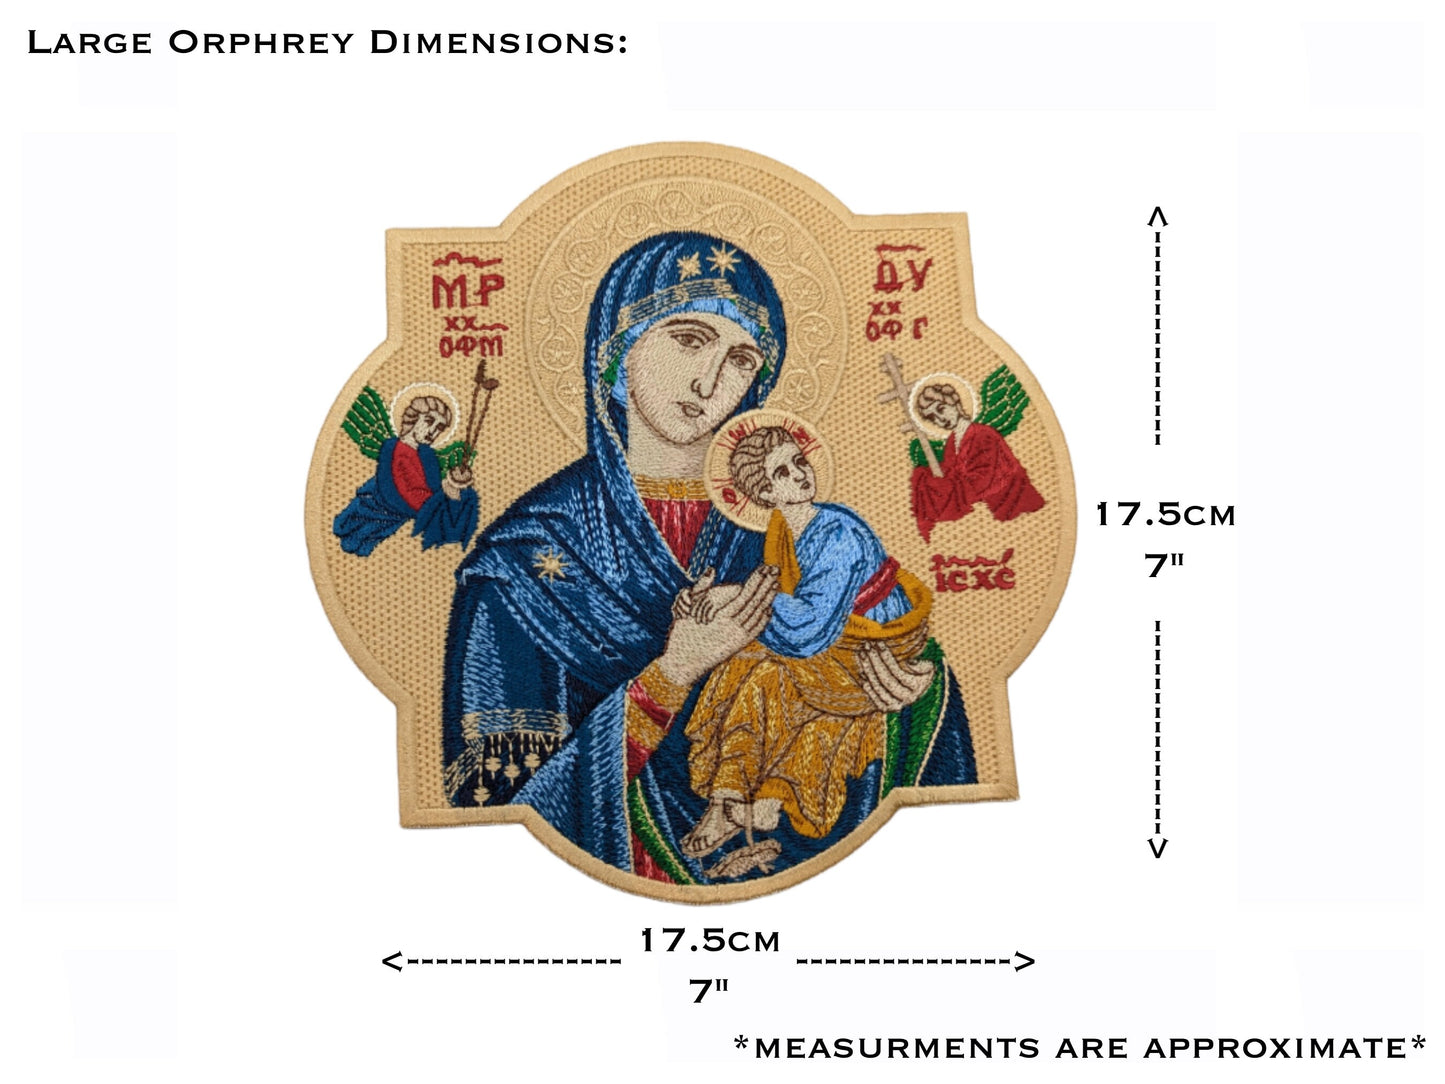 Our Lady of Perpetual Help, Iron on Patch, Vestment making, Embroidered Orphrey, Ecclesiastical vestment making, Perpetual Succour